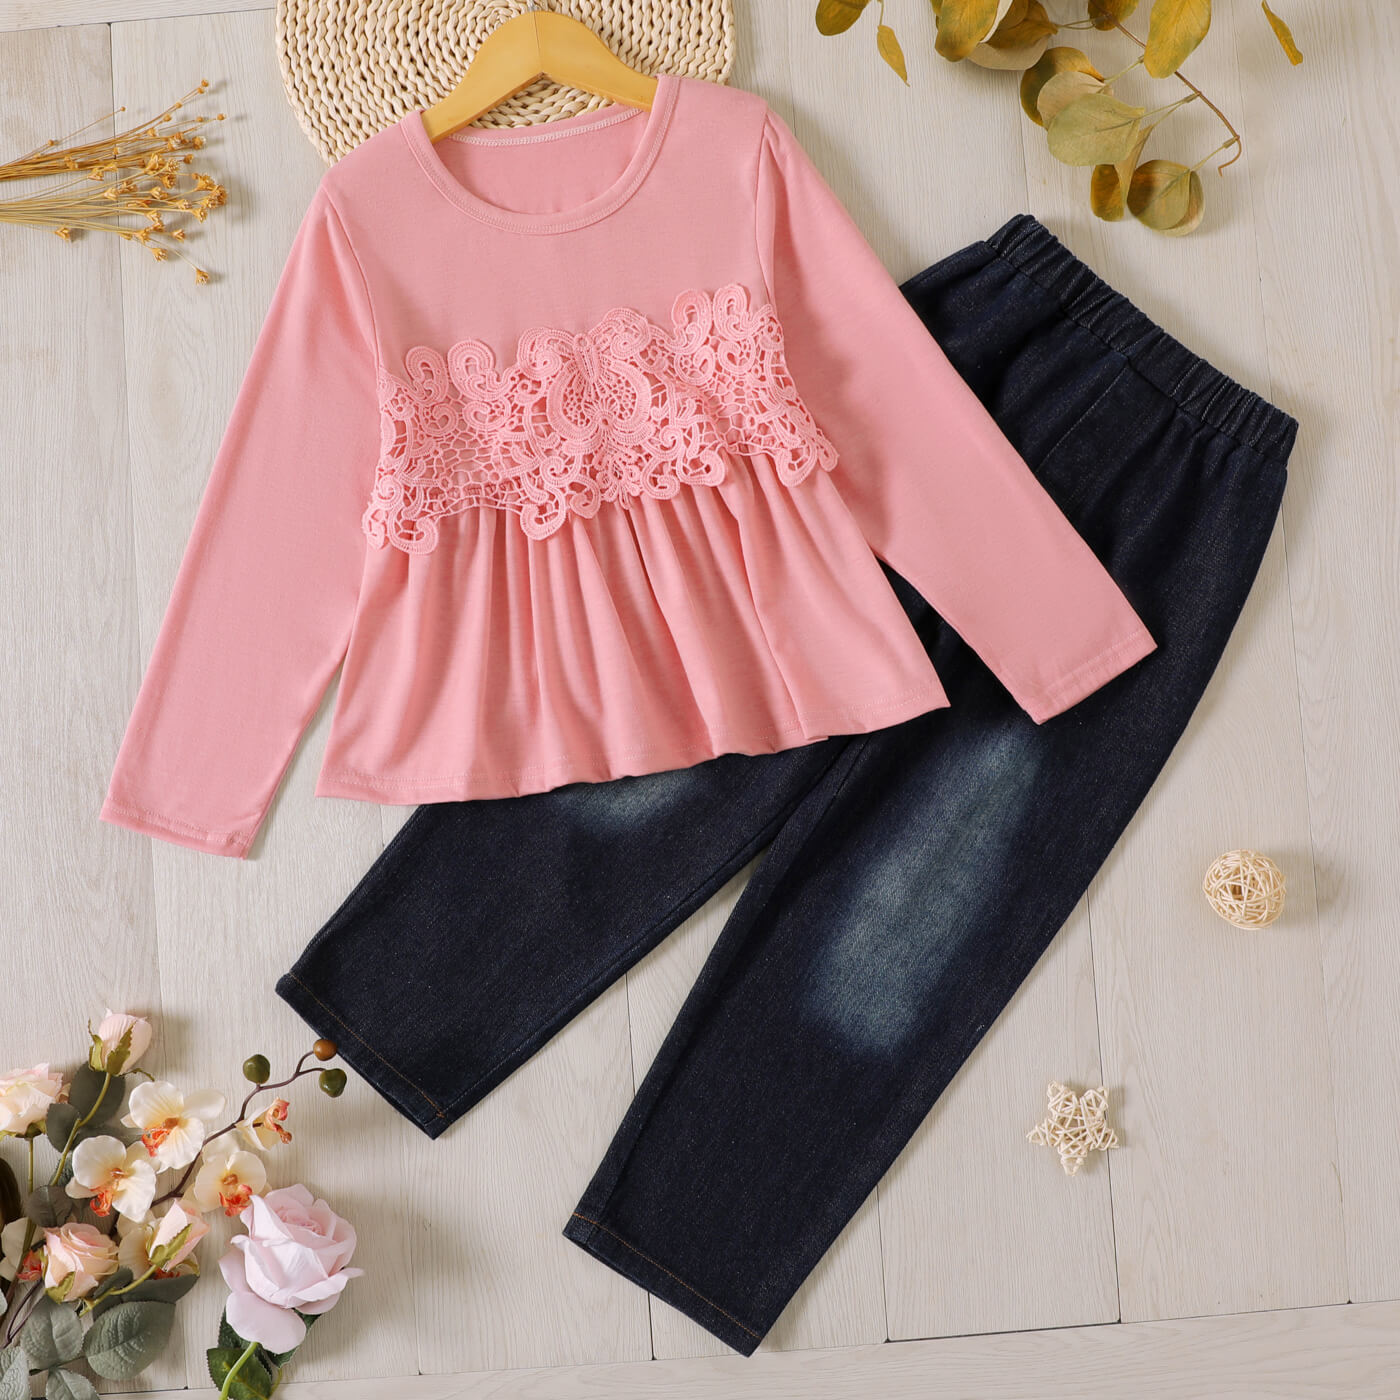 Girls Lace Trim Peplum Top and Jeans Set